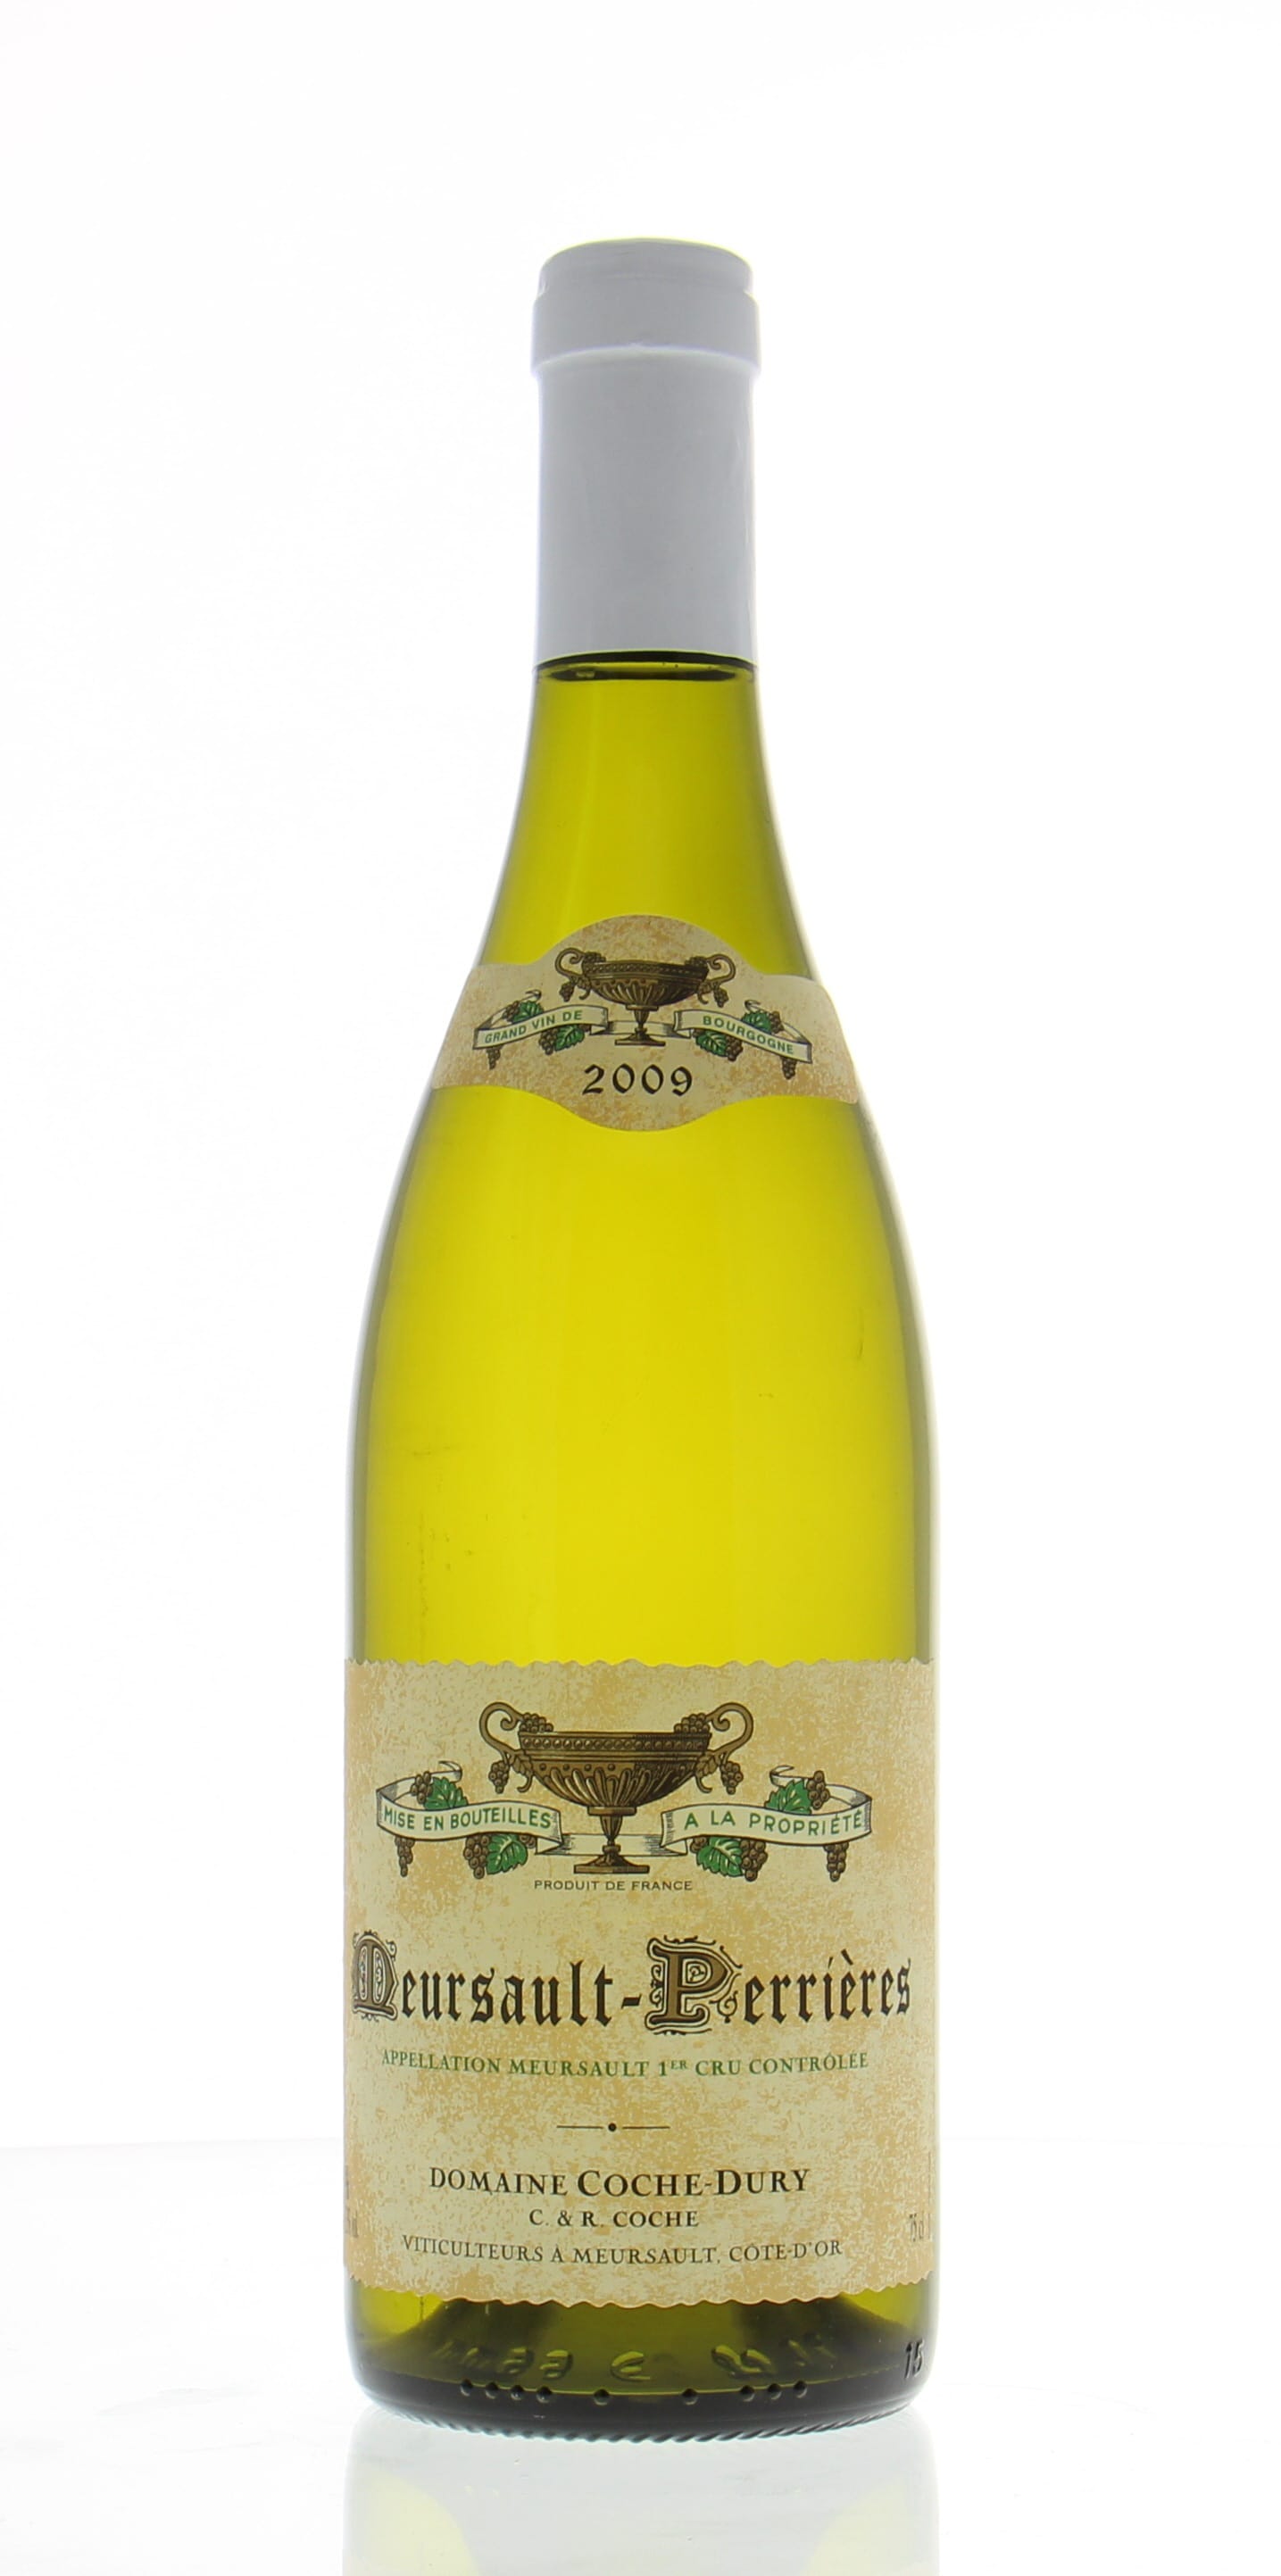 Coche Dury - Meursault Perrieres 2009 From Original Wooden Case